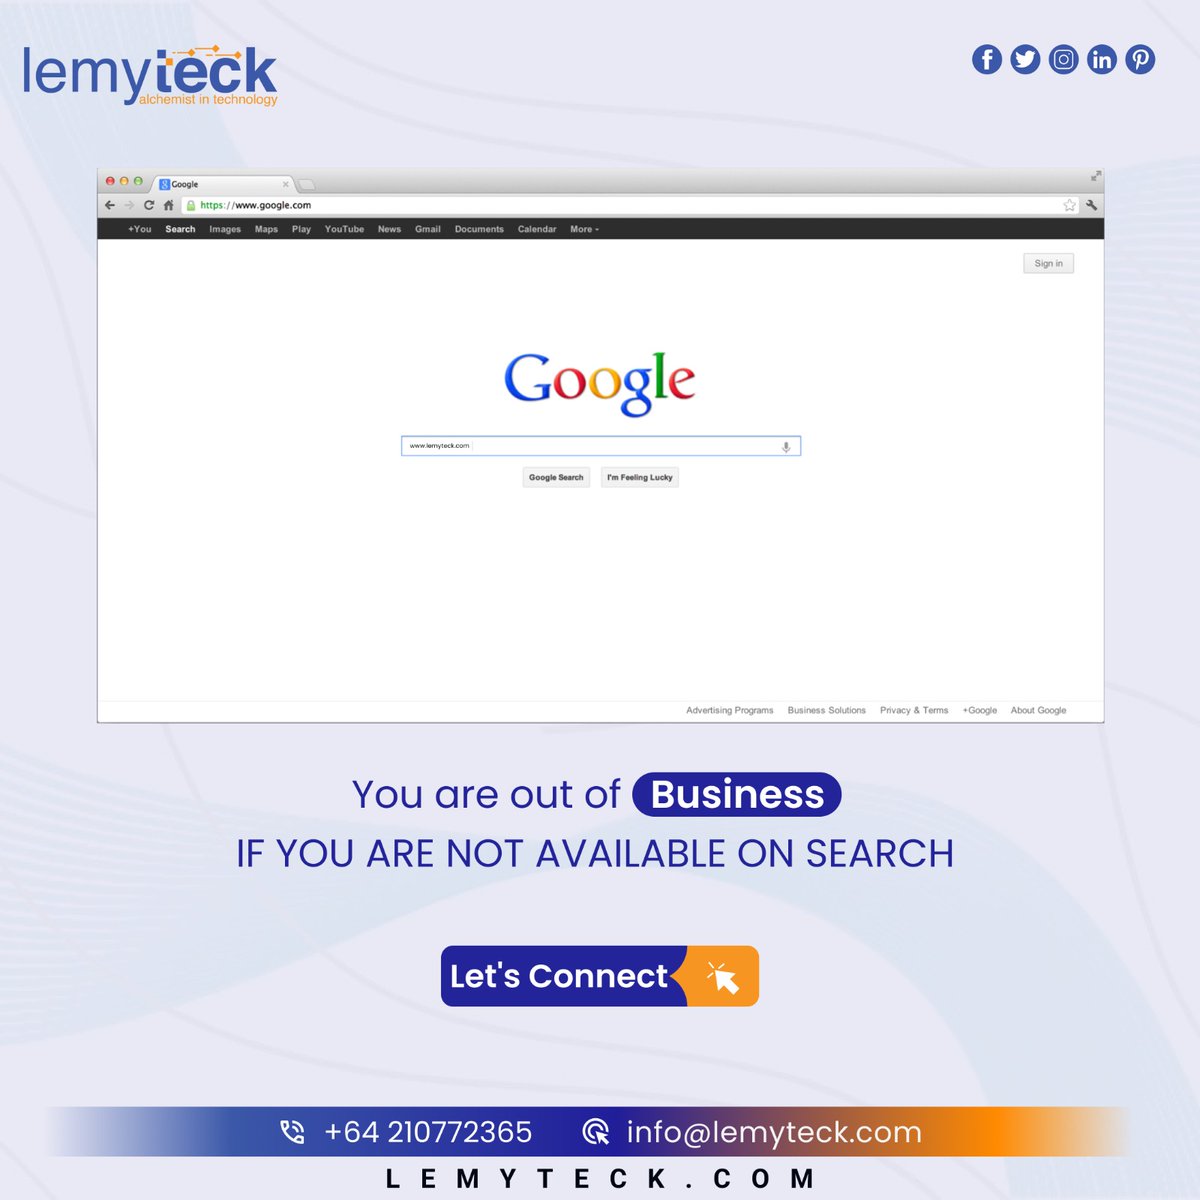 In today's market, visibility is crucial. 🌟 You're losing out on possible business if you're not searchable. 🚀 Let's make sure your internet presence is strong. 💻 Keep up with the times by interacting with us. 🌐 #lemyteck #BusinessSuccess #OnlinePresence #newzealand